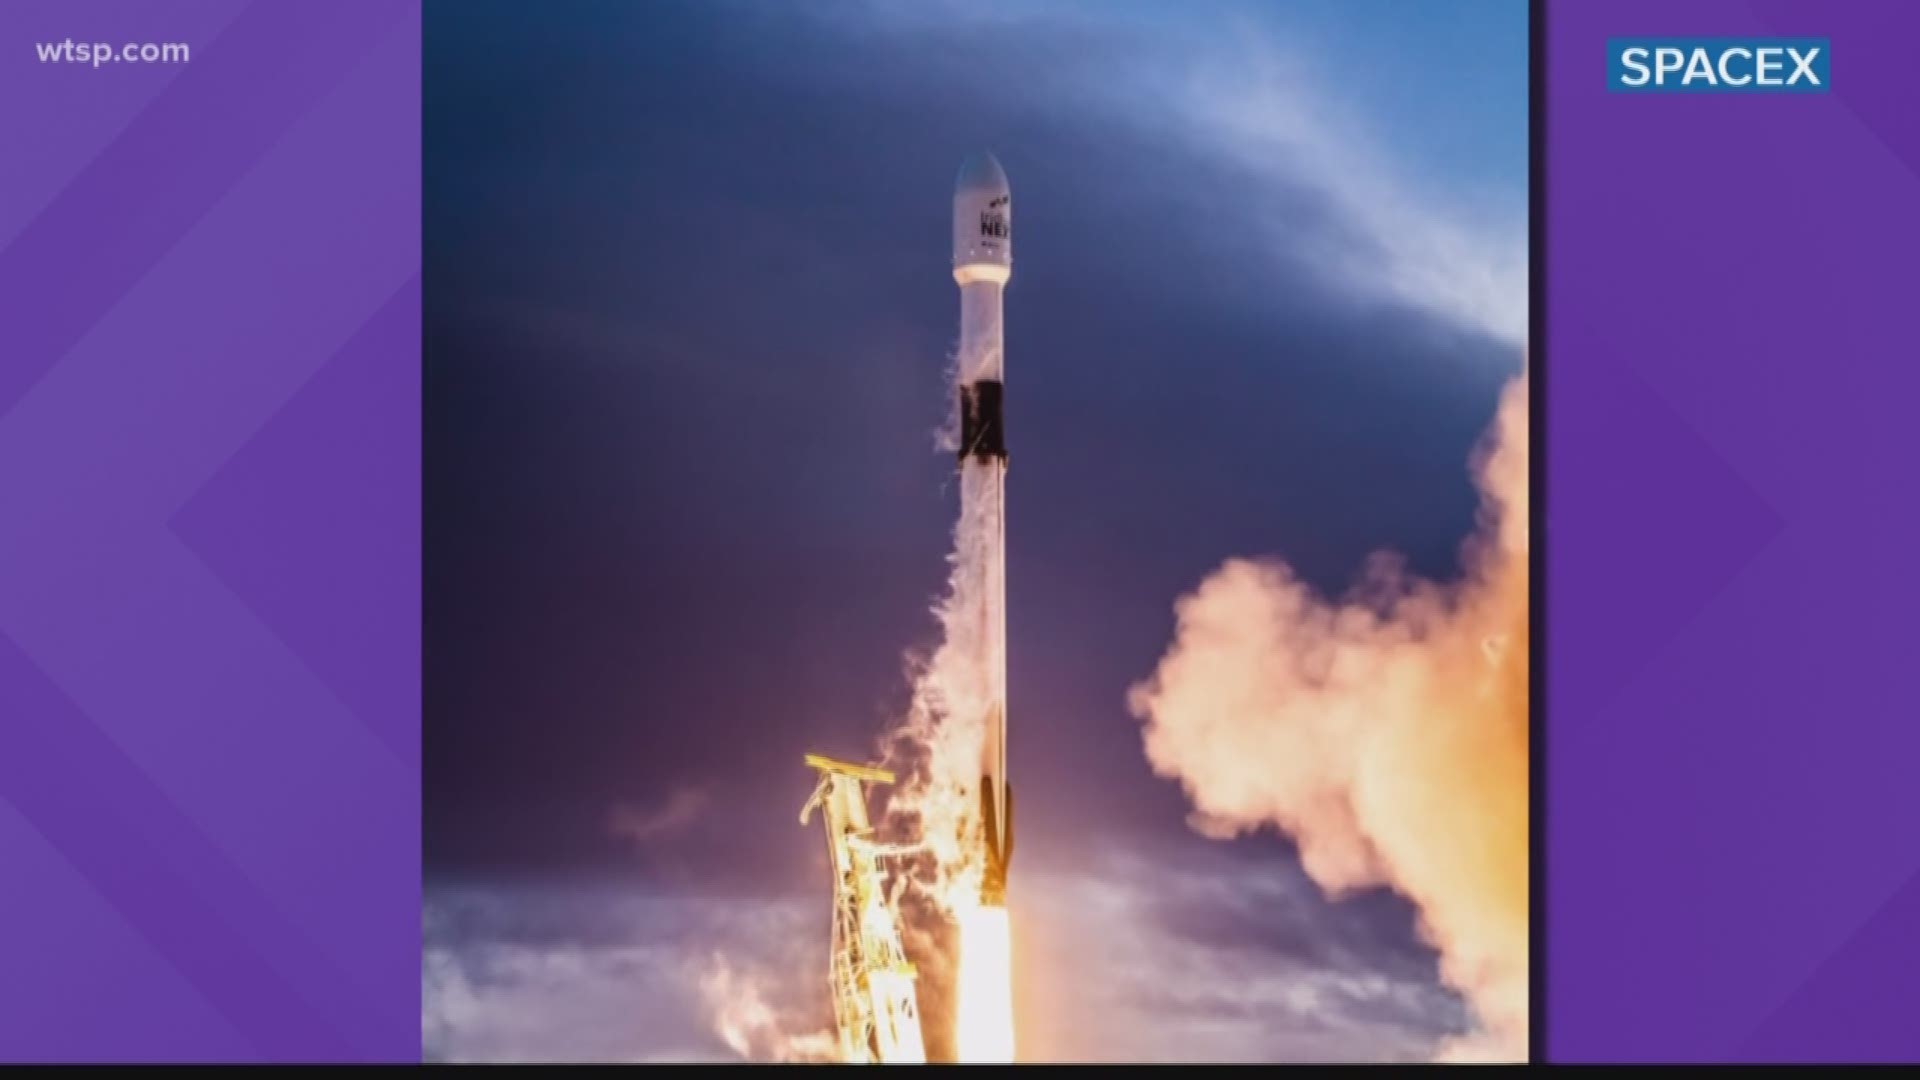 SpaceX will launch the Falcon 9 rocket carrying 60 Starlink satellites to space.